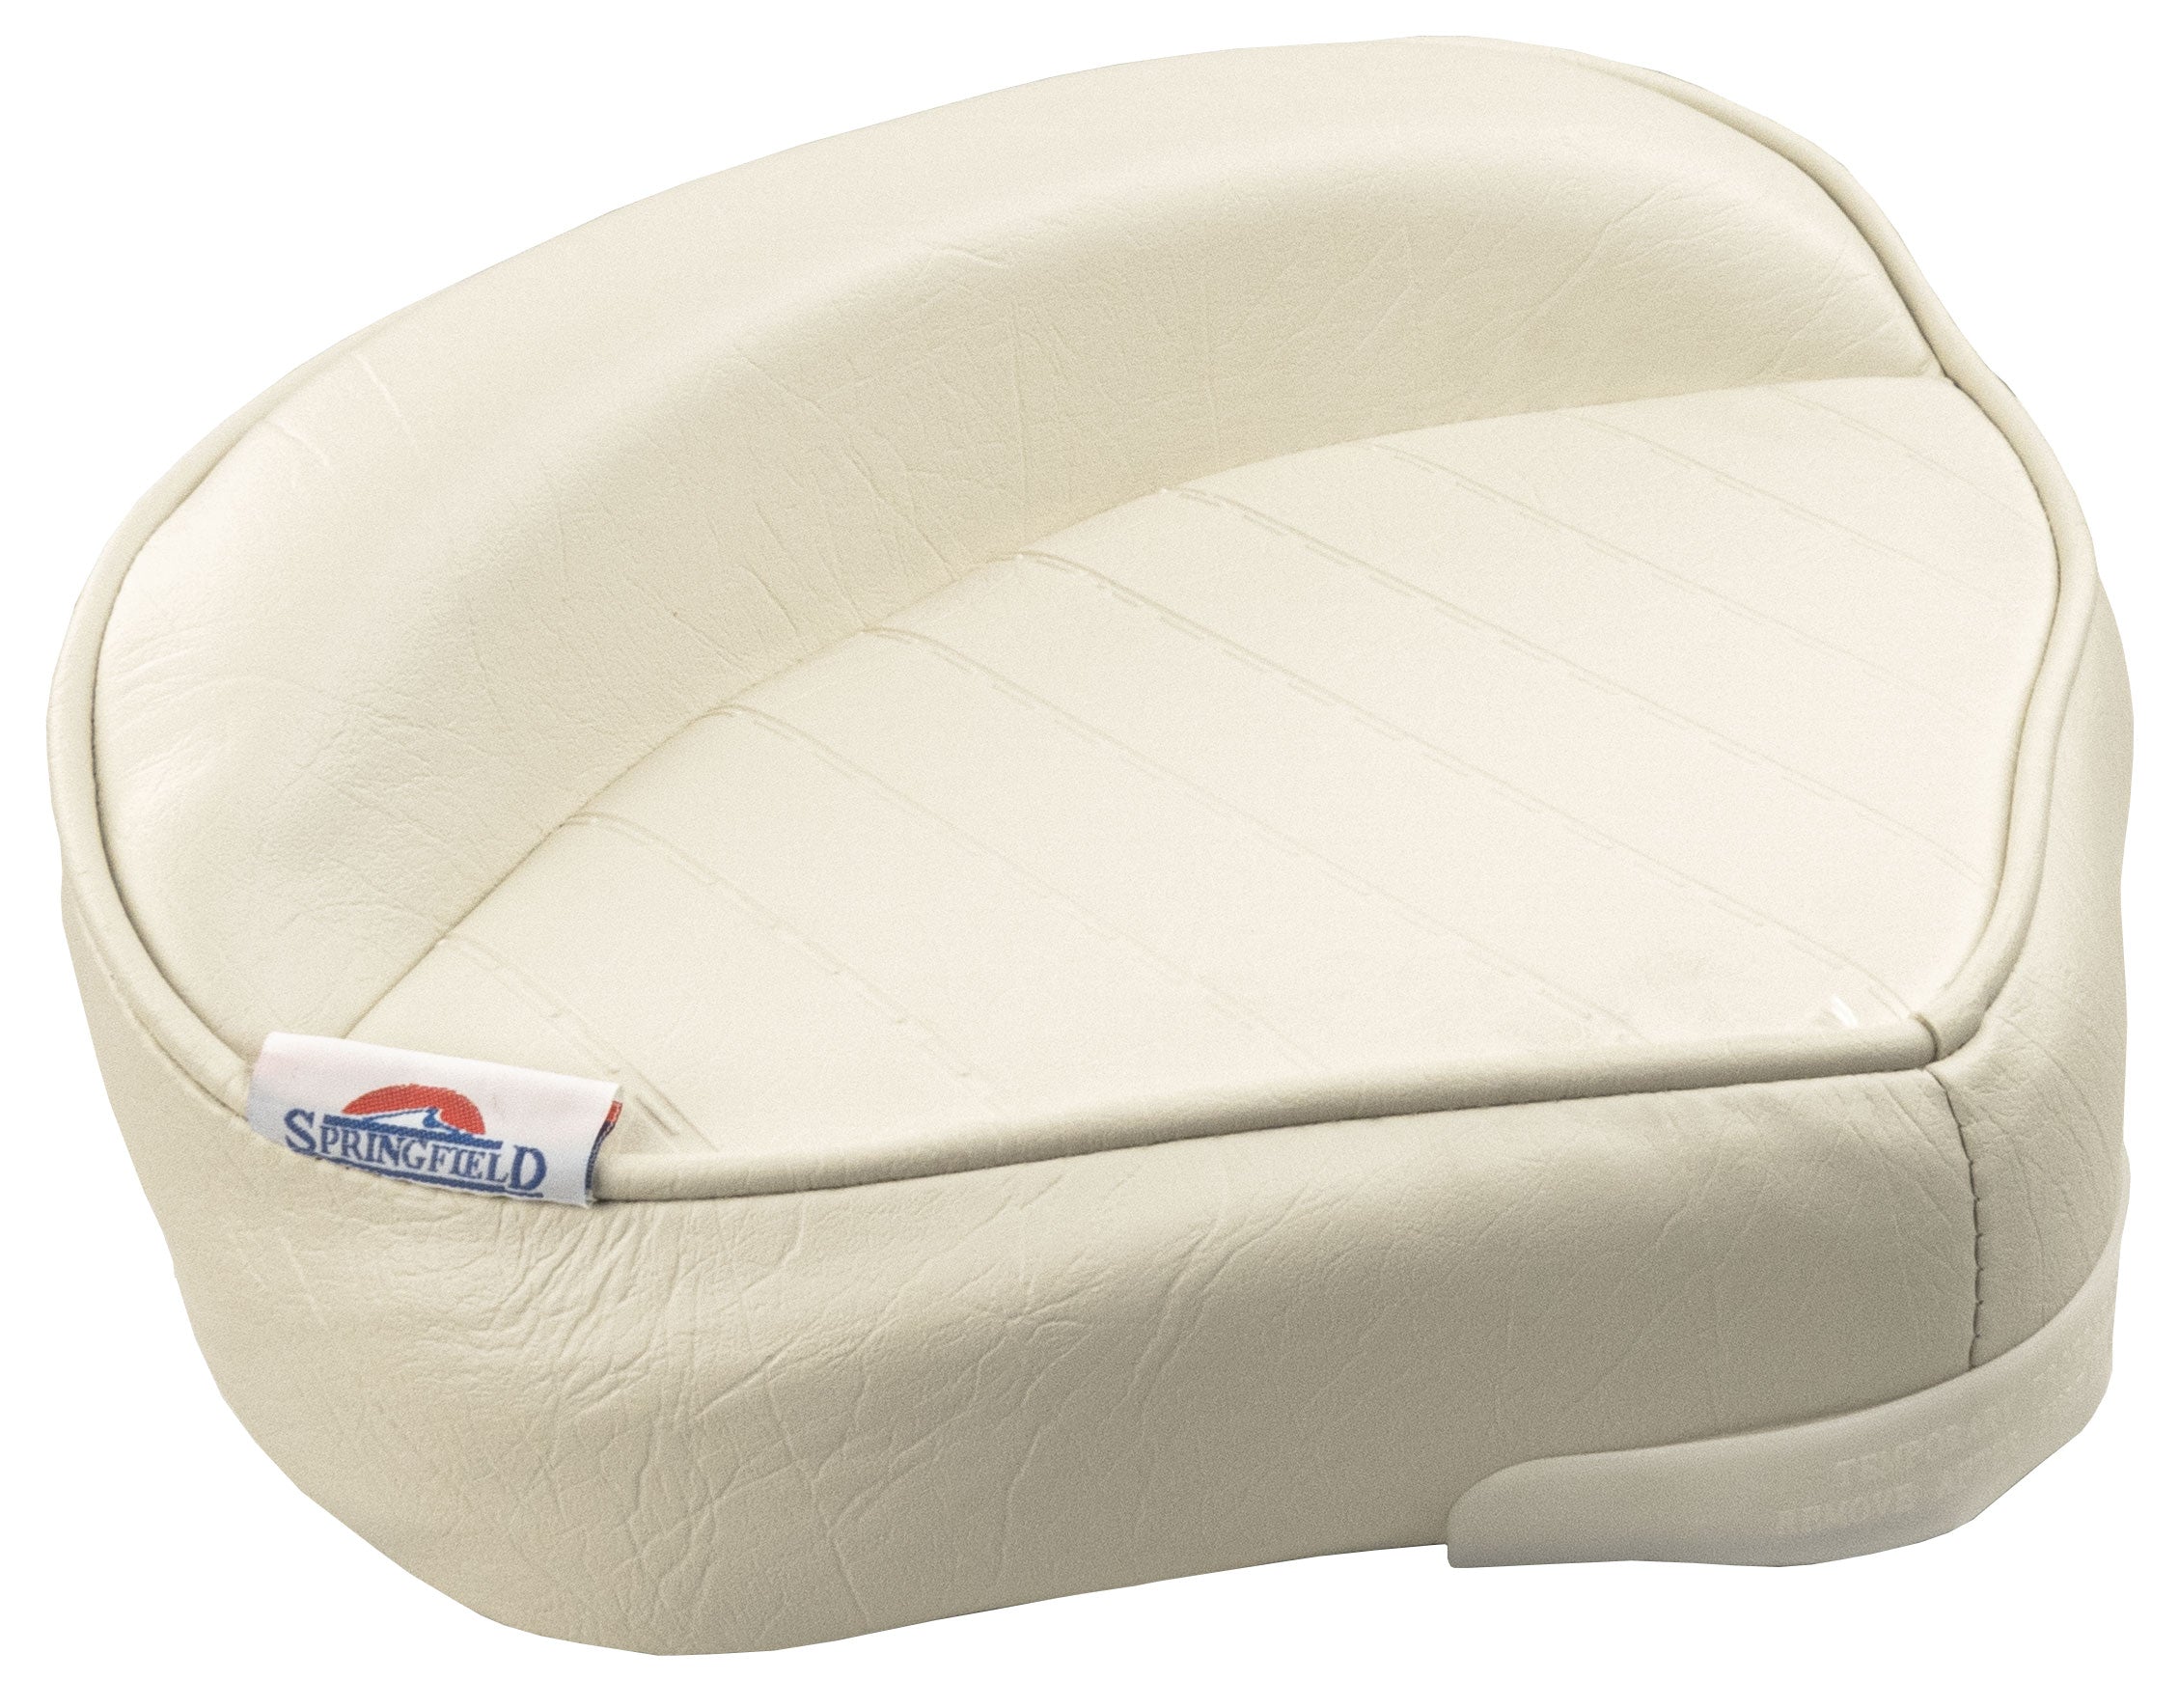 Springfield 1040216-NS Pro Stand Up Seat without Substrate - White